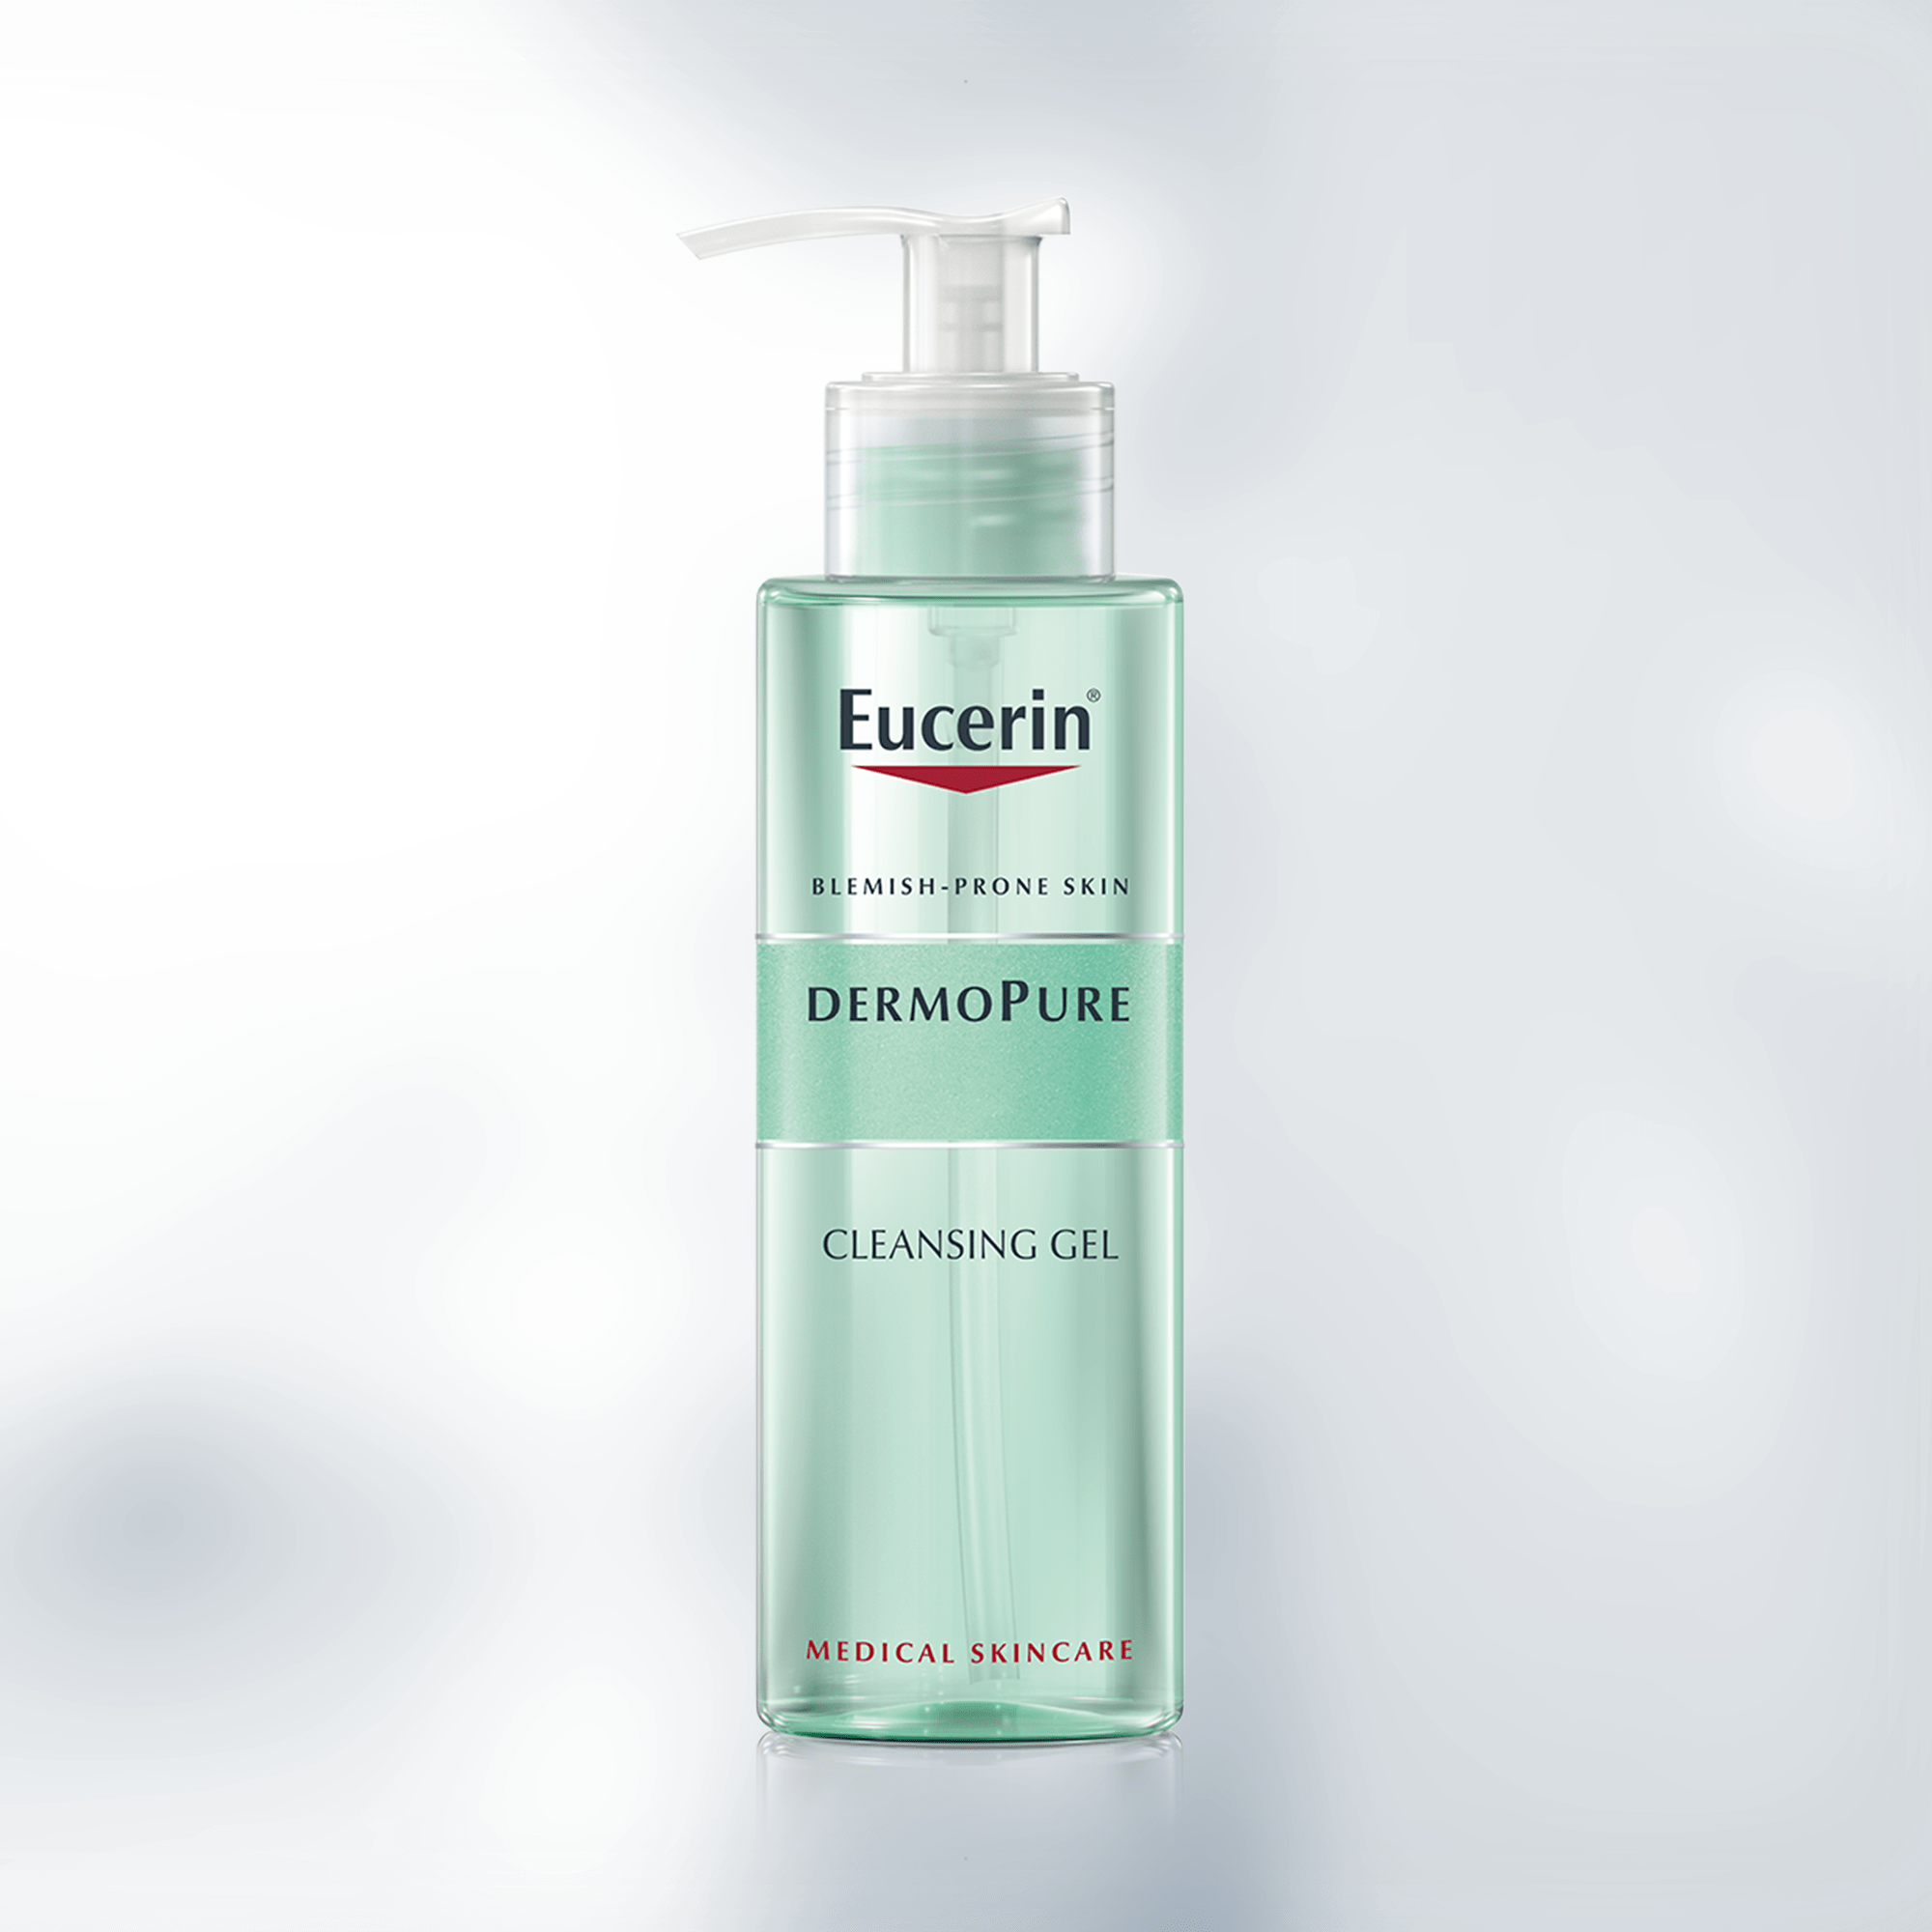 A non-comedogenic face wash gel that gently and effectively cleanses skin and removes excess sebum, dirt and make-up. Skin feels clean, clear supple.